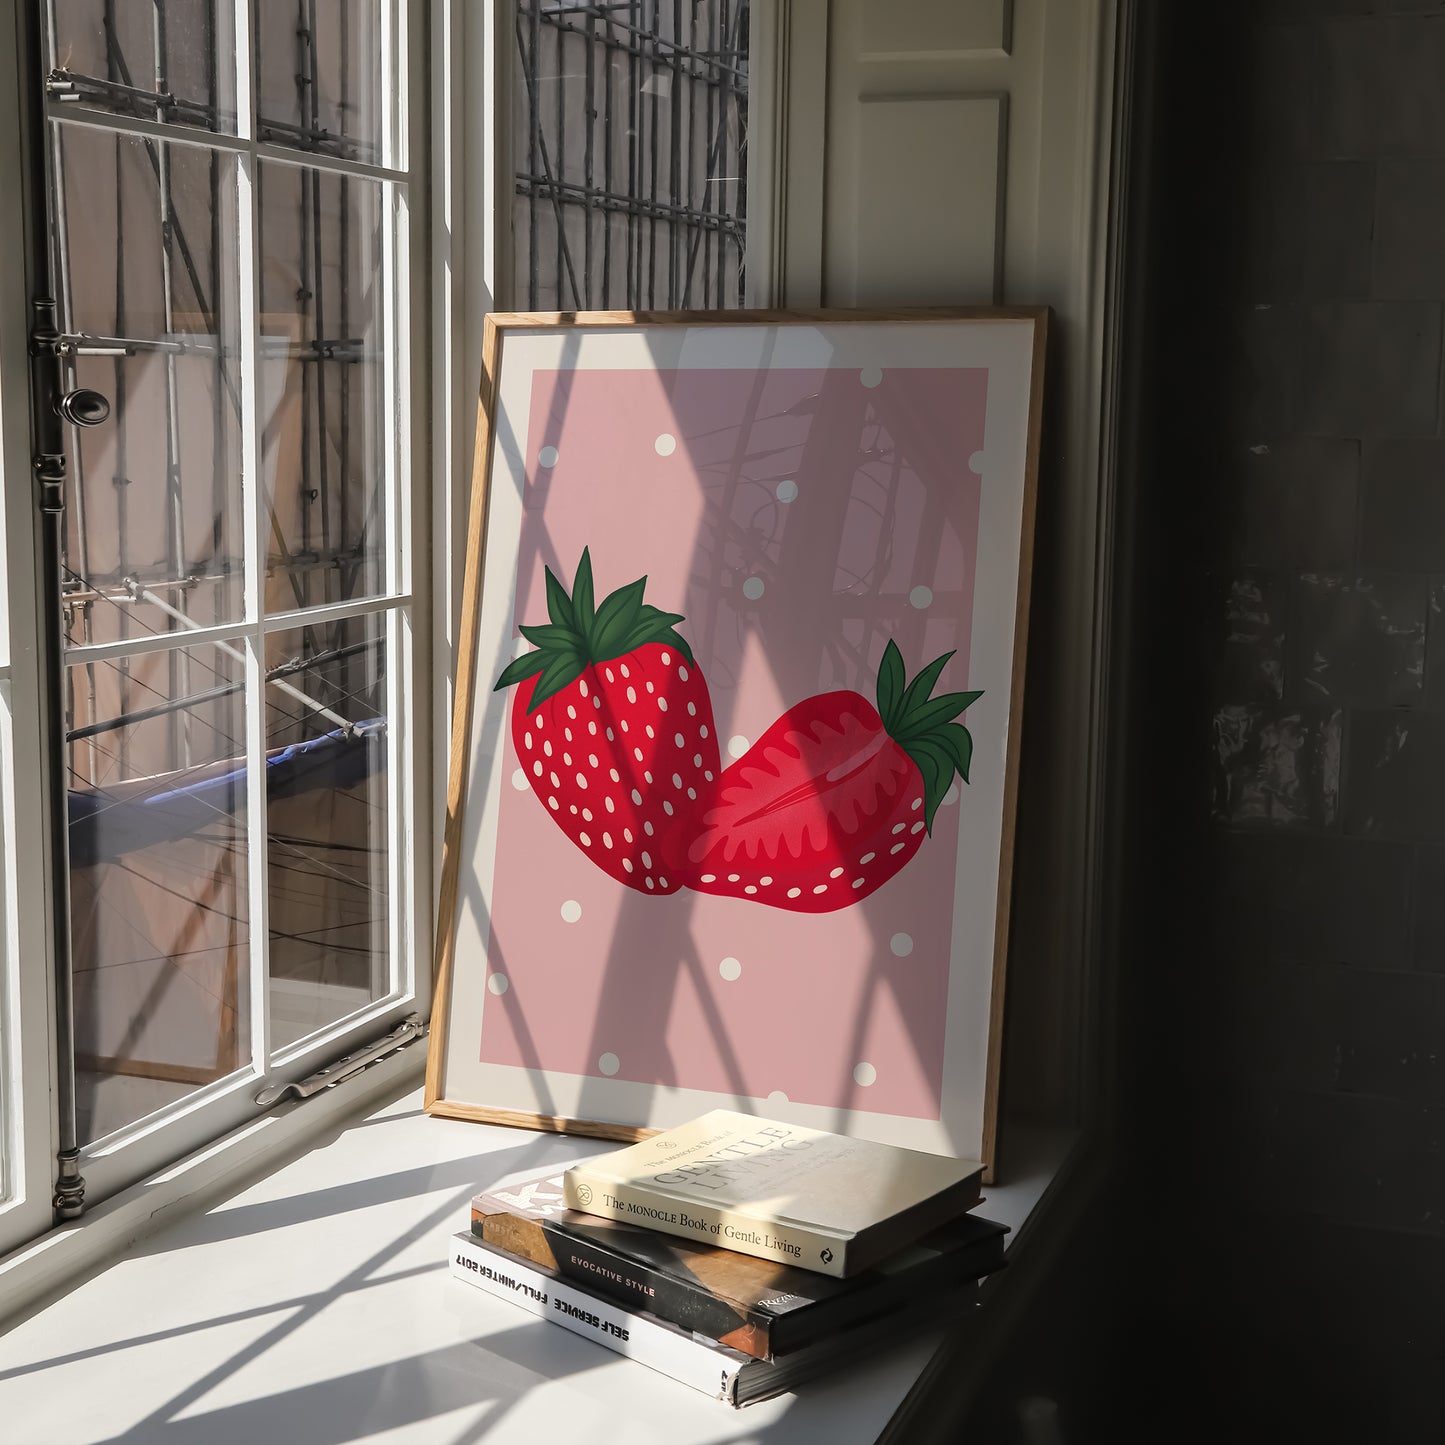 Spotted Strawberry Print